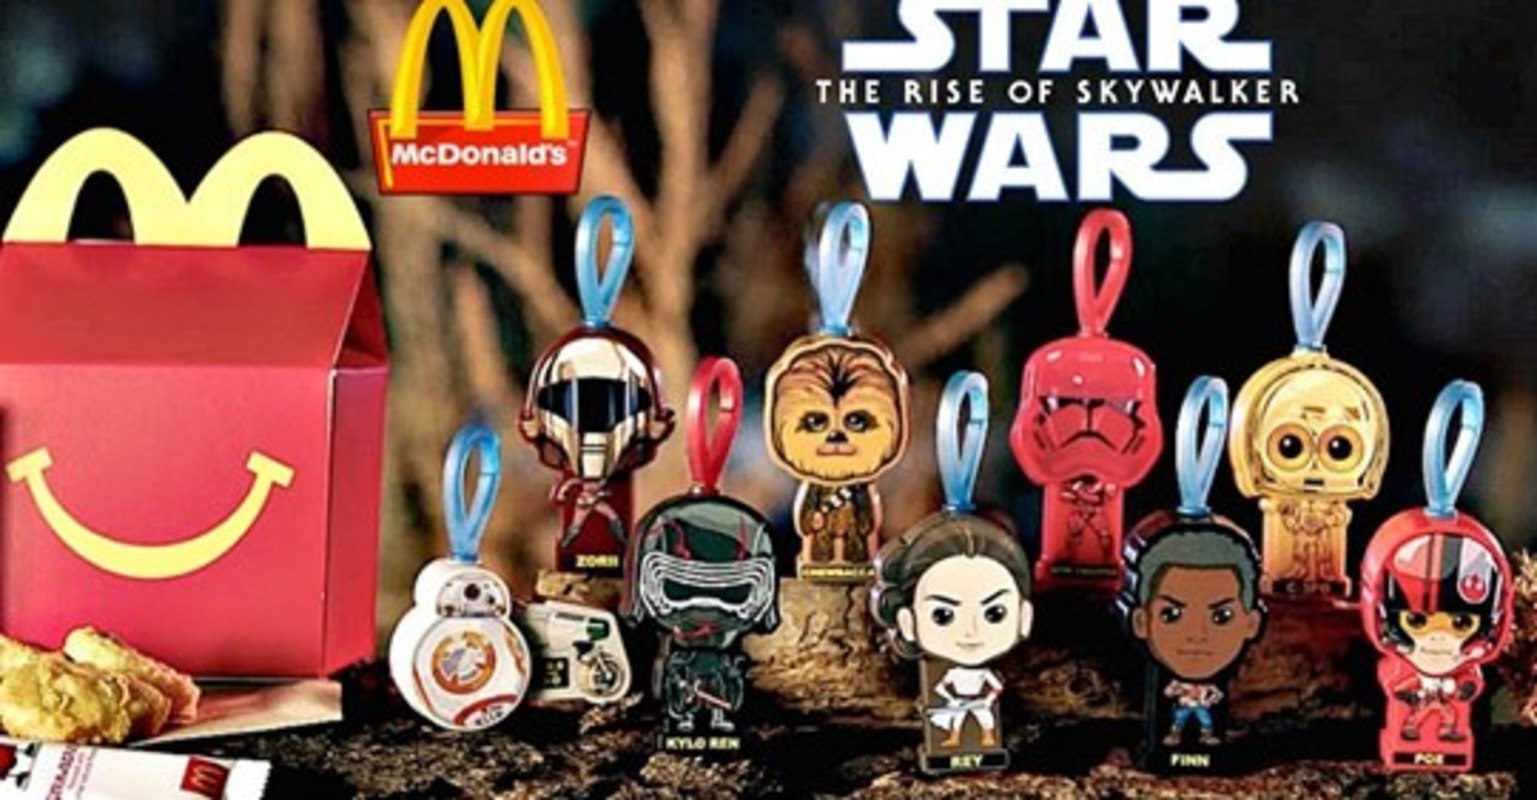 A Look At The McDonalds Star Wars The Rise Of Skywalker Happy Meal Toys